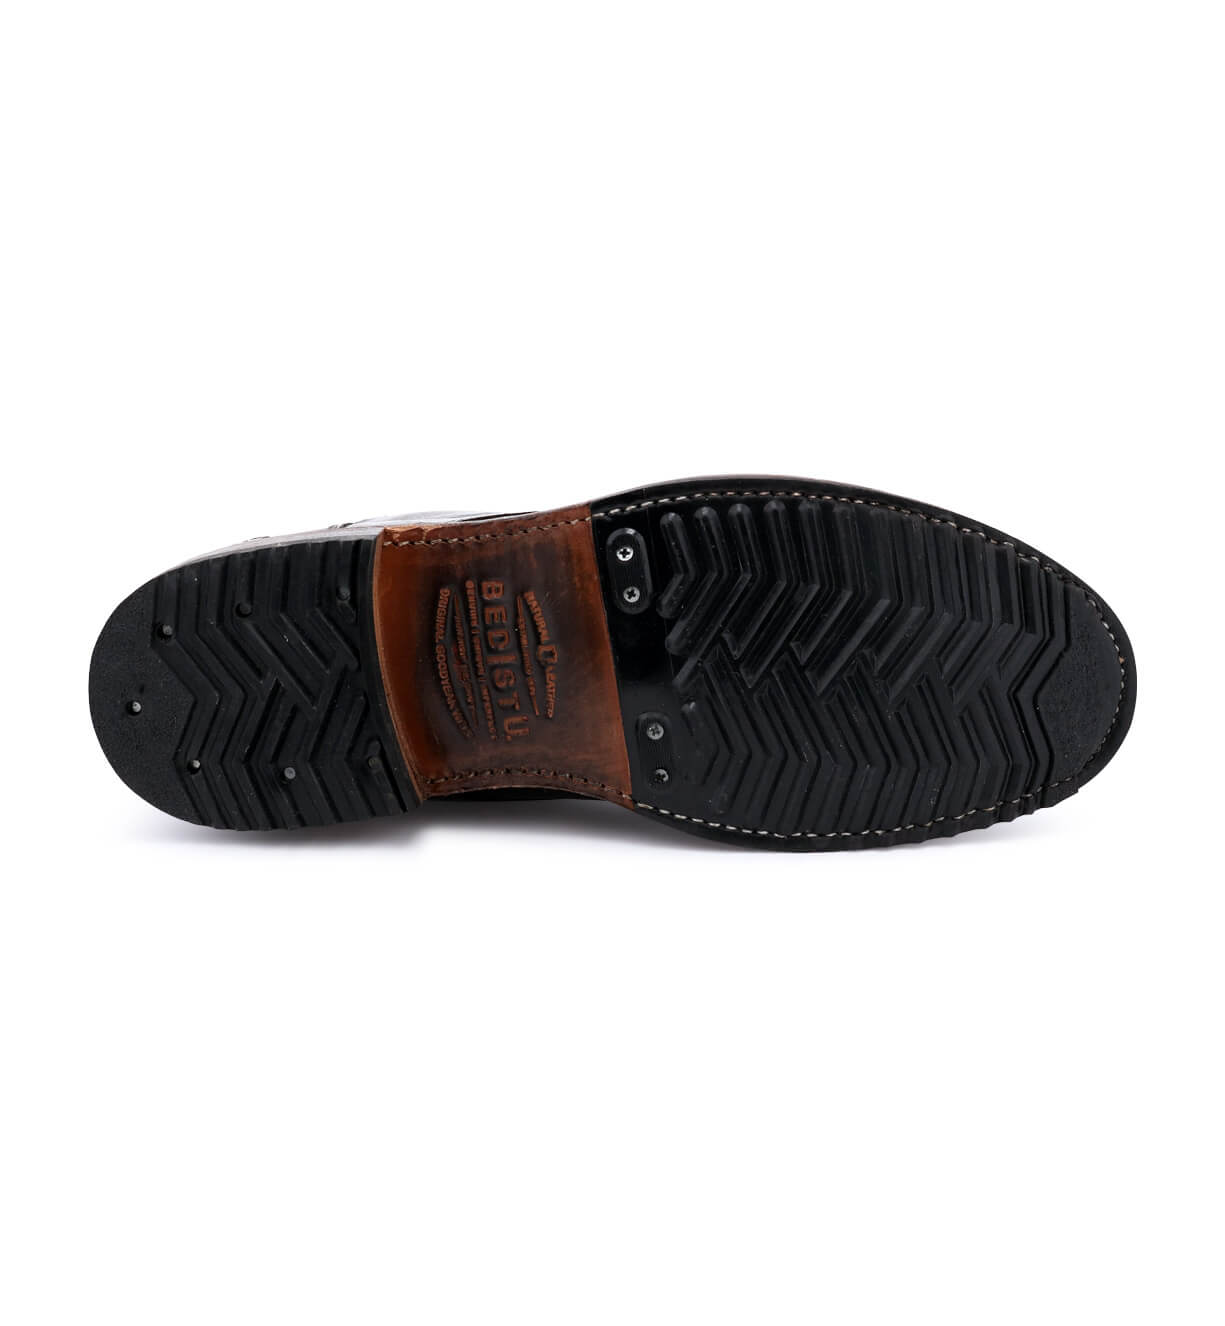 The back view of a Bed Stu men's shoe with black and brown soles.